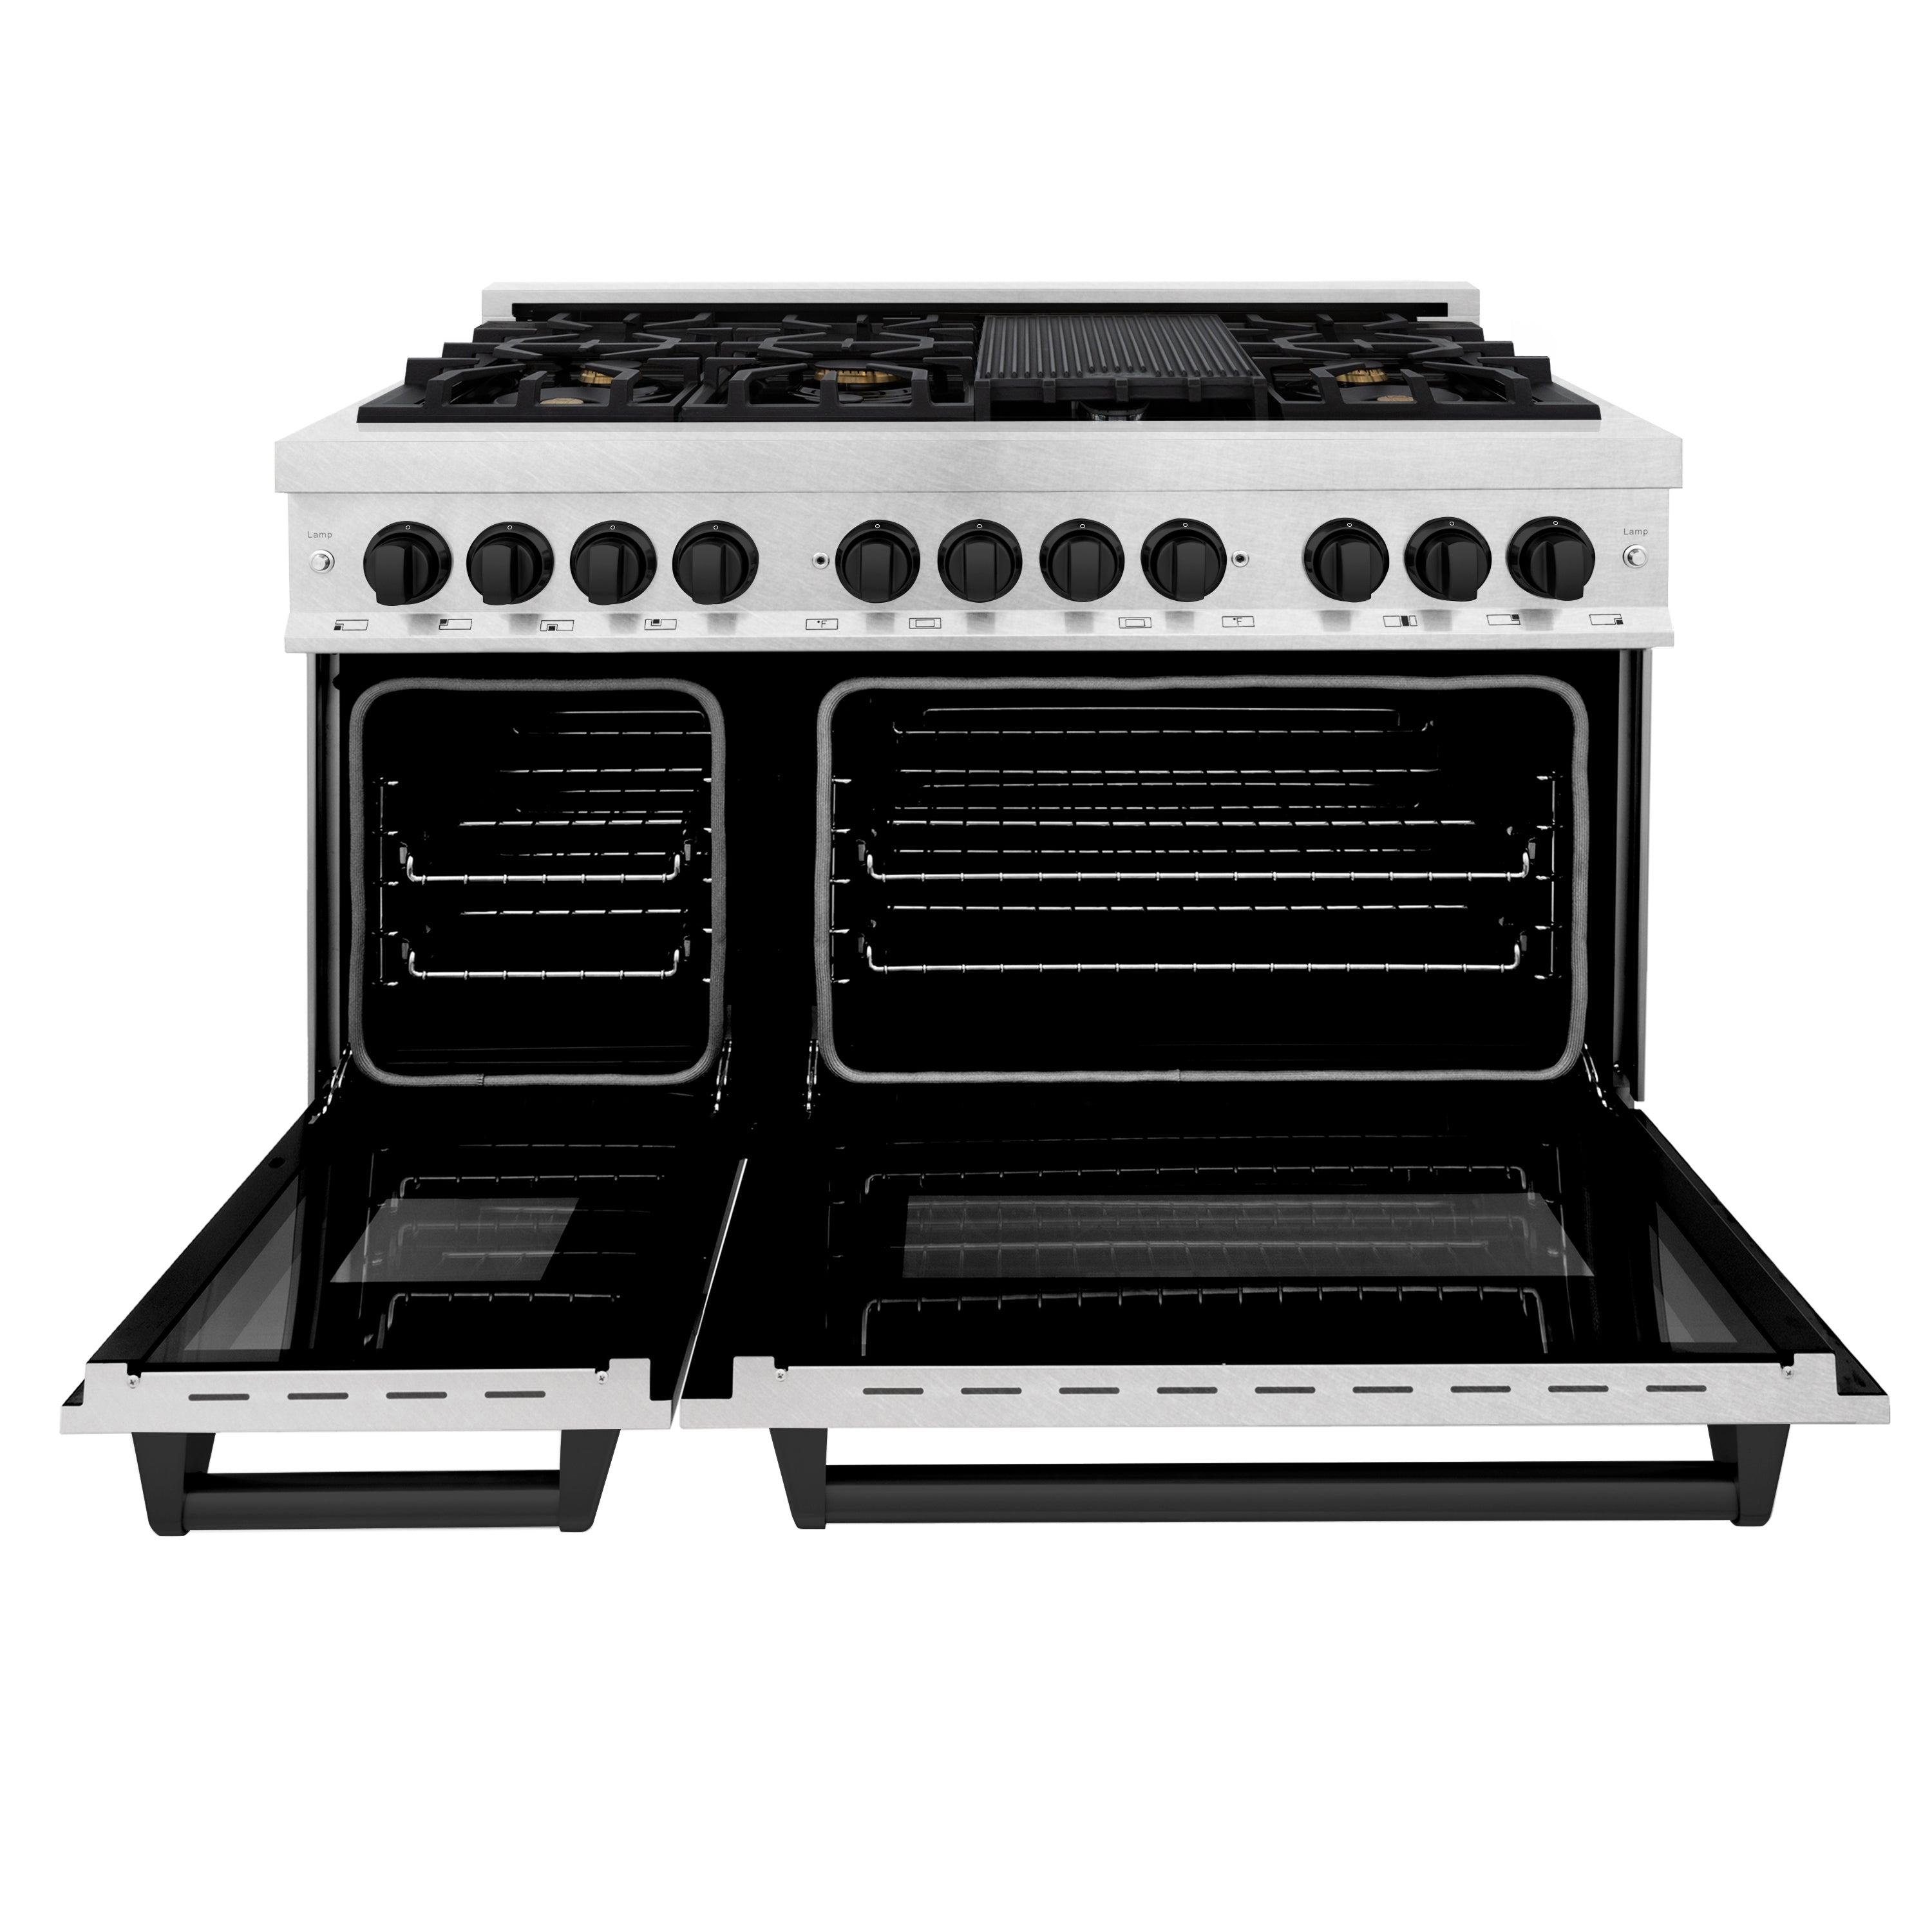 ZLINE Autograph Edition 48" 6.0 cu. ft. Dual Fuel Range with Gas Stove and Electric Oven in DuraSnow® Stainless Steel with Matte Black Accents (RASZ-SN-48-MB)